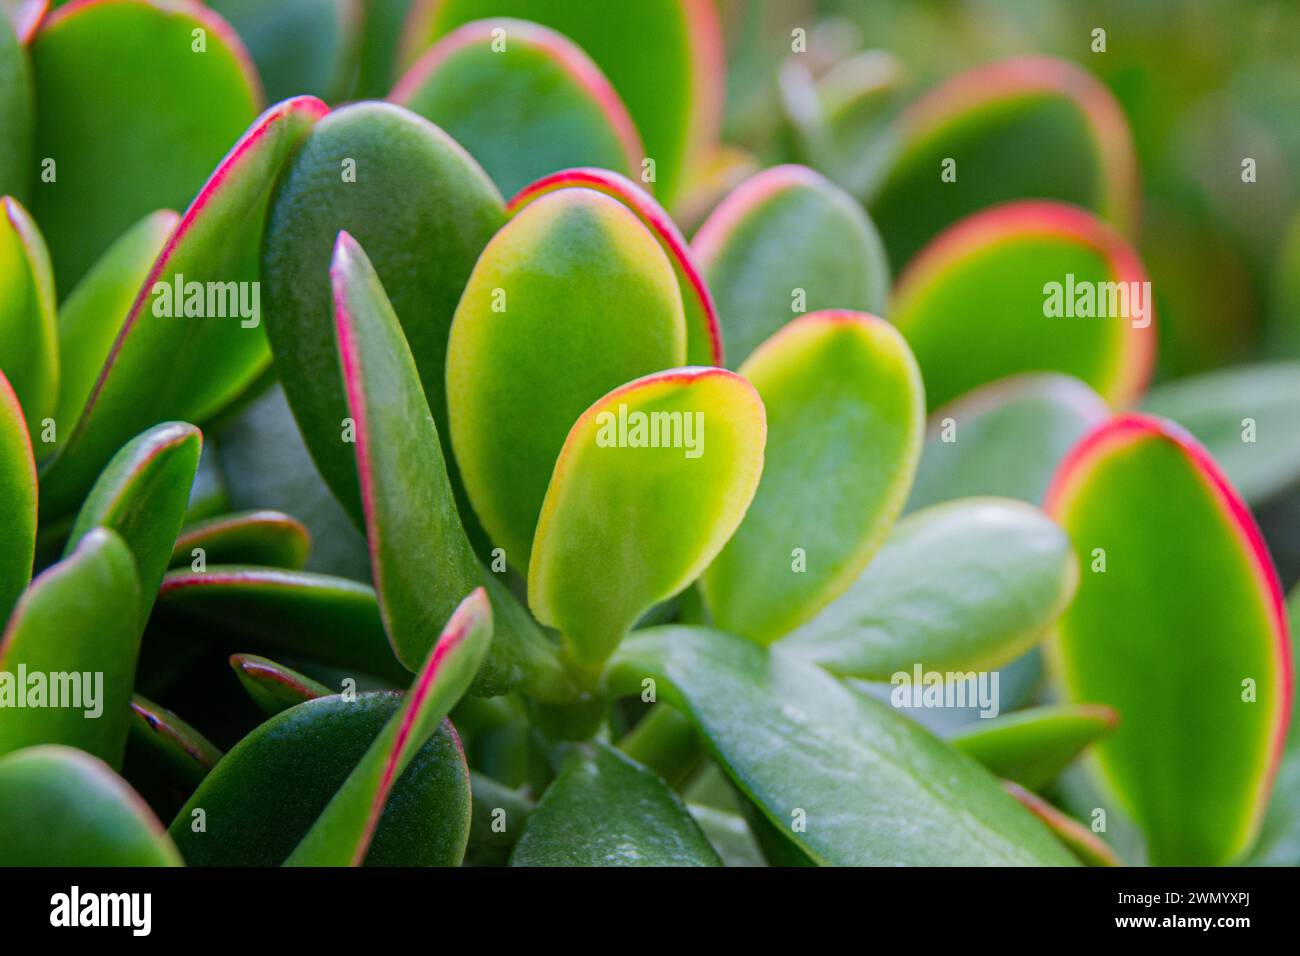 Detail of the fleshy leaves of a jade plant. Macro photograph taken in a garden with natural light outdoors. Stock Photo